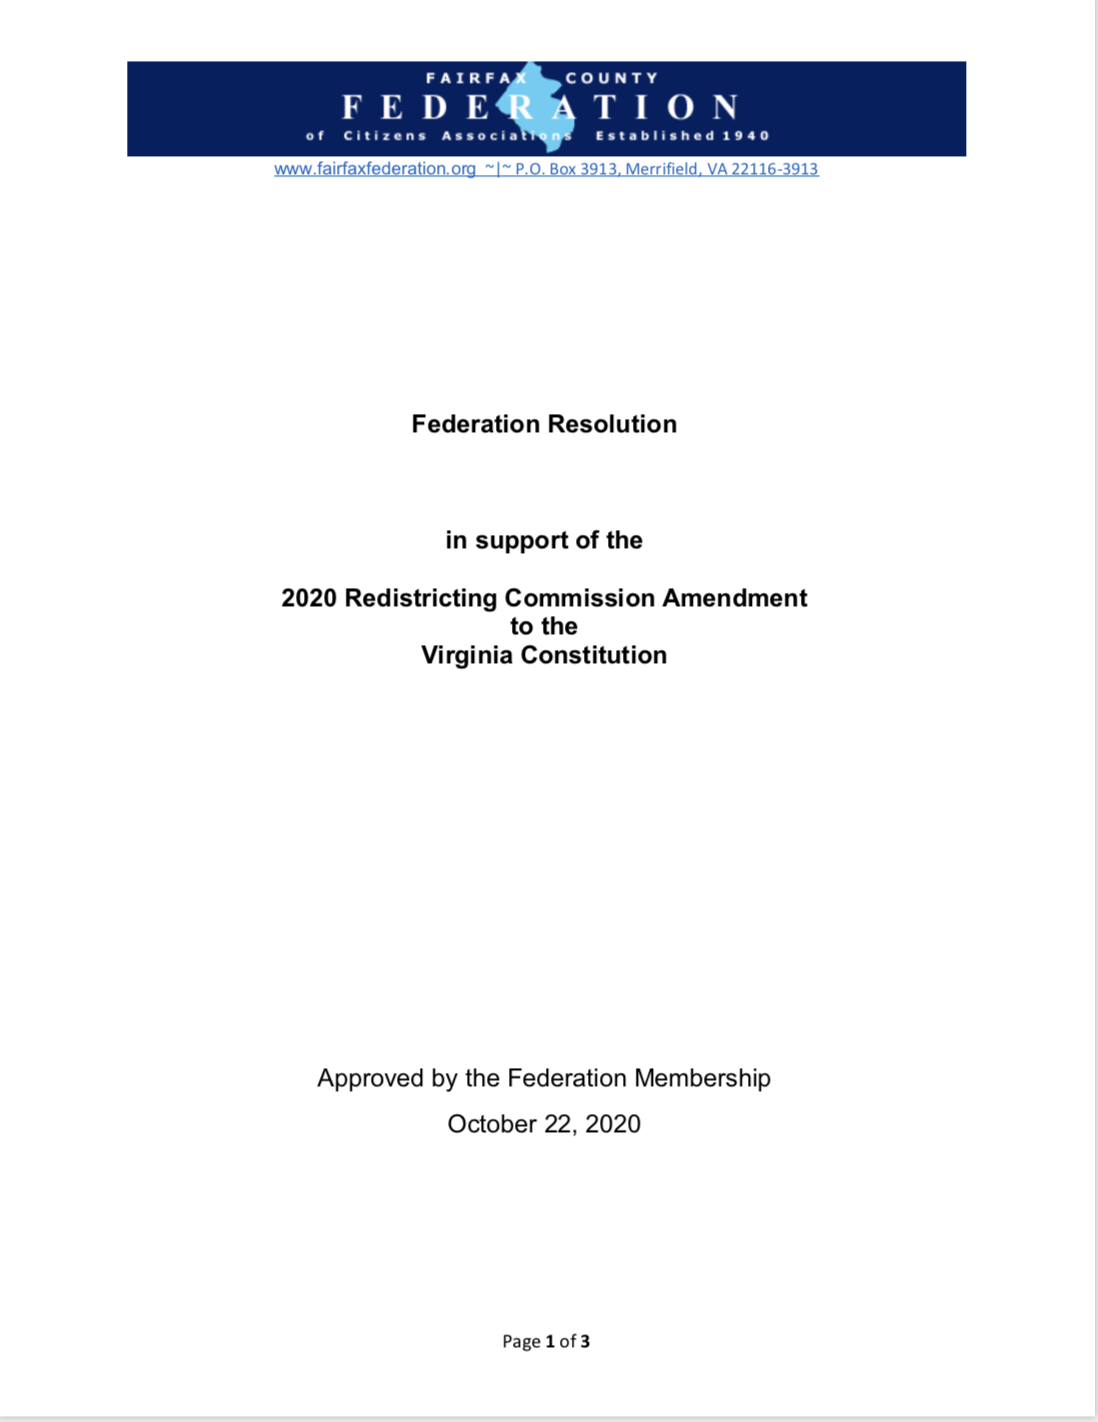 Resolution Supporting Redistricting Constitutional Amendment Approved 22 October 2020